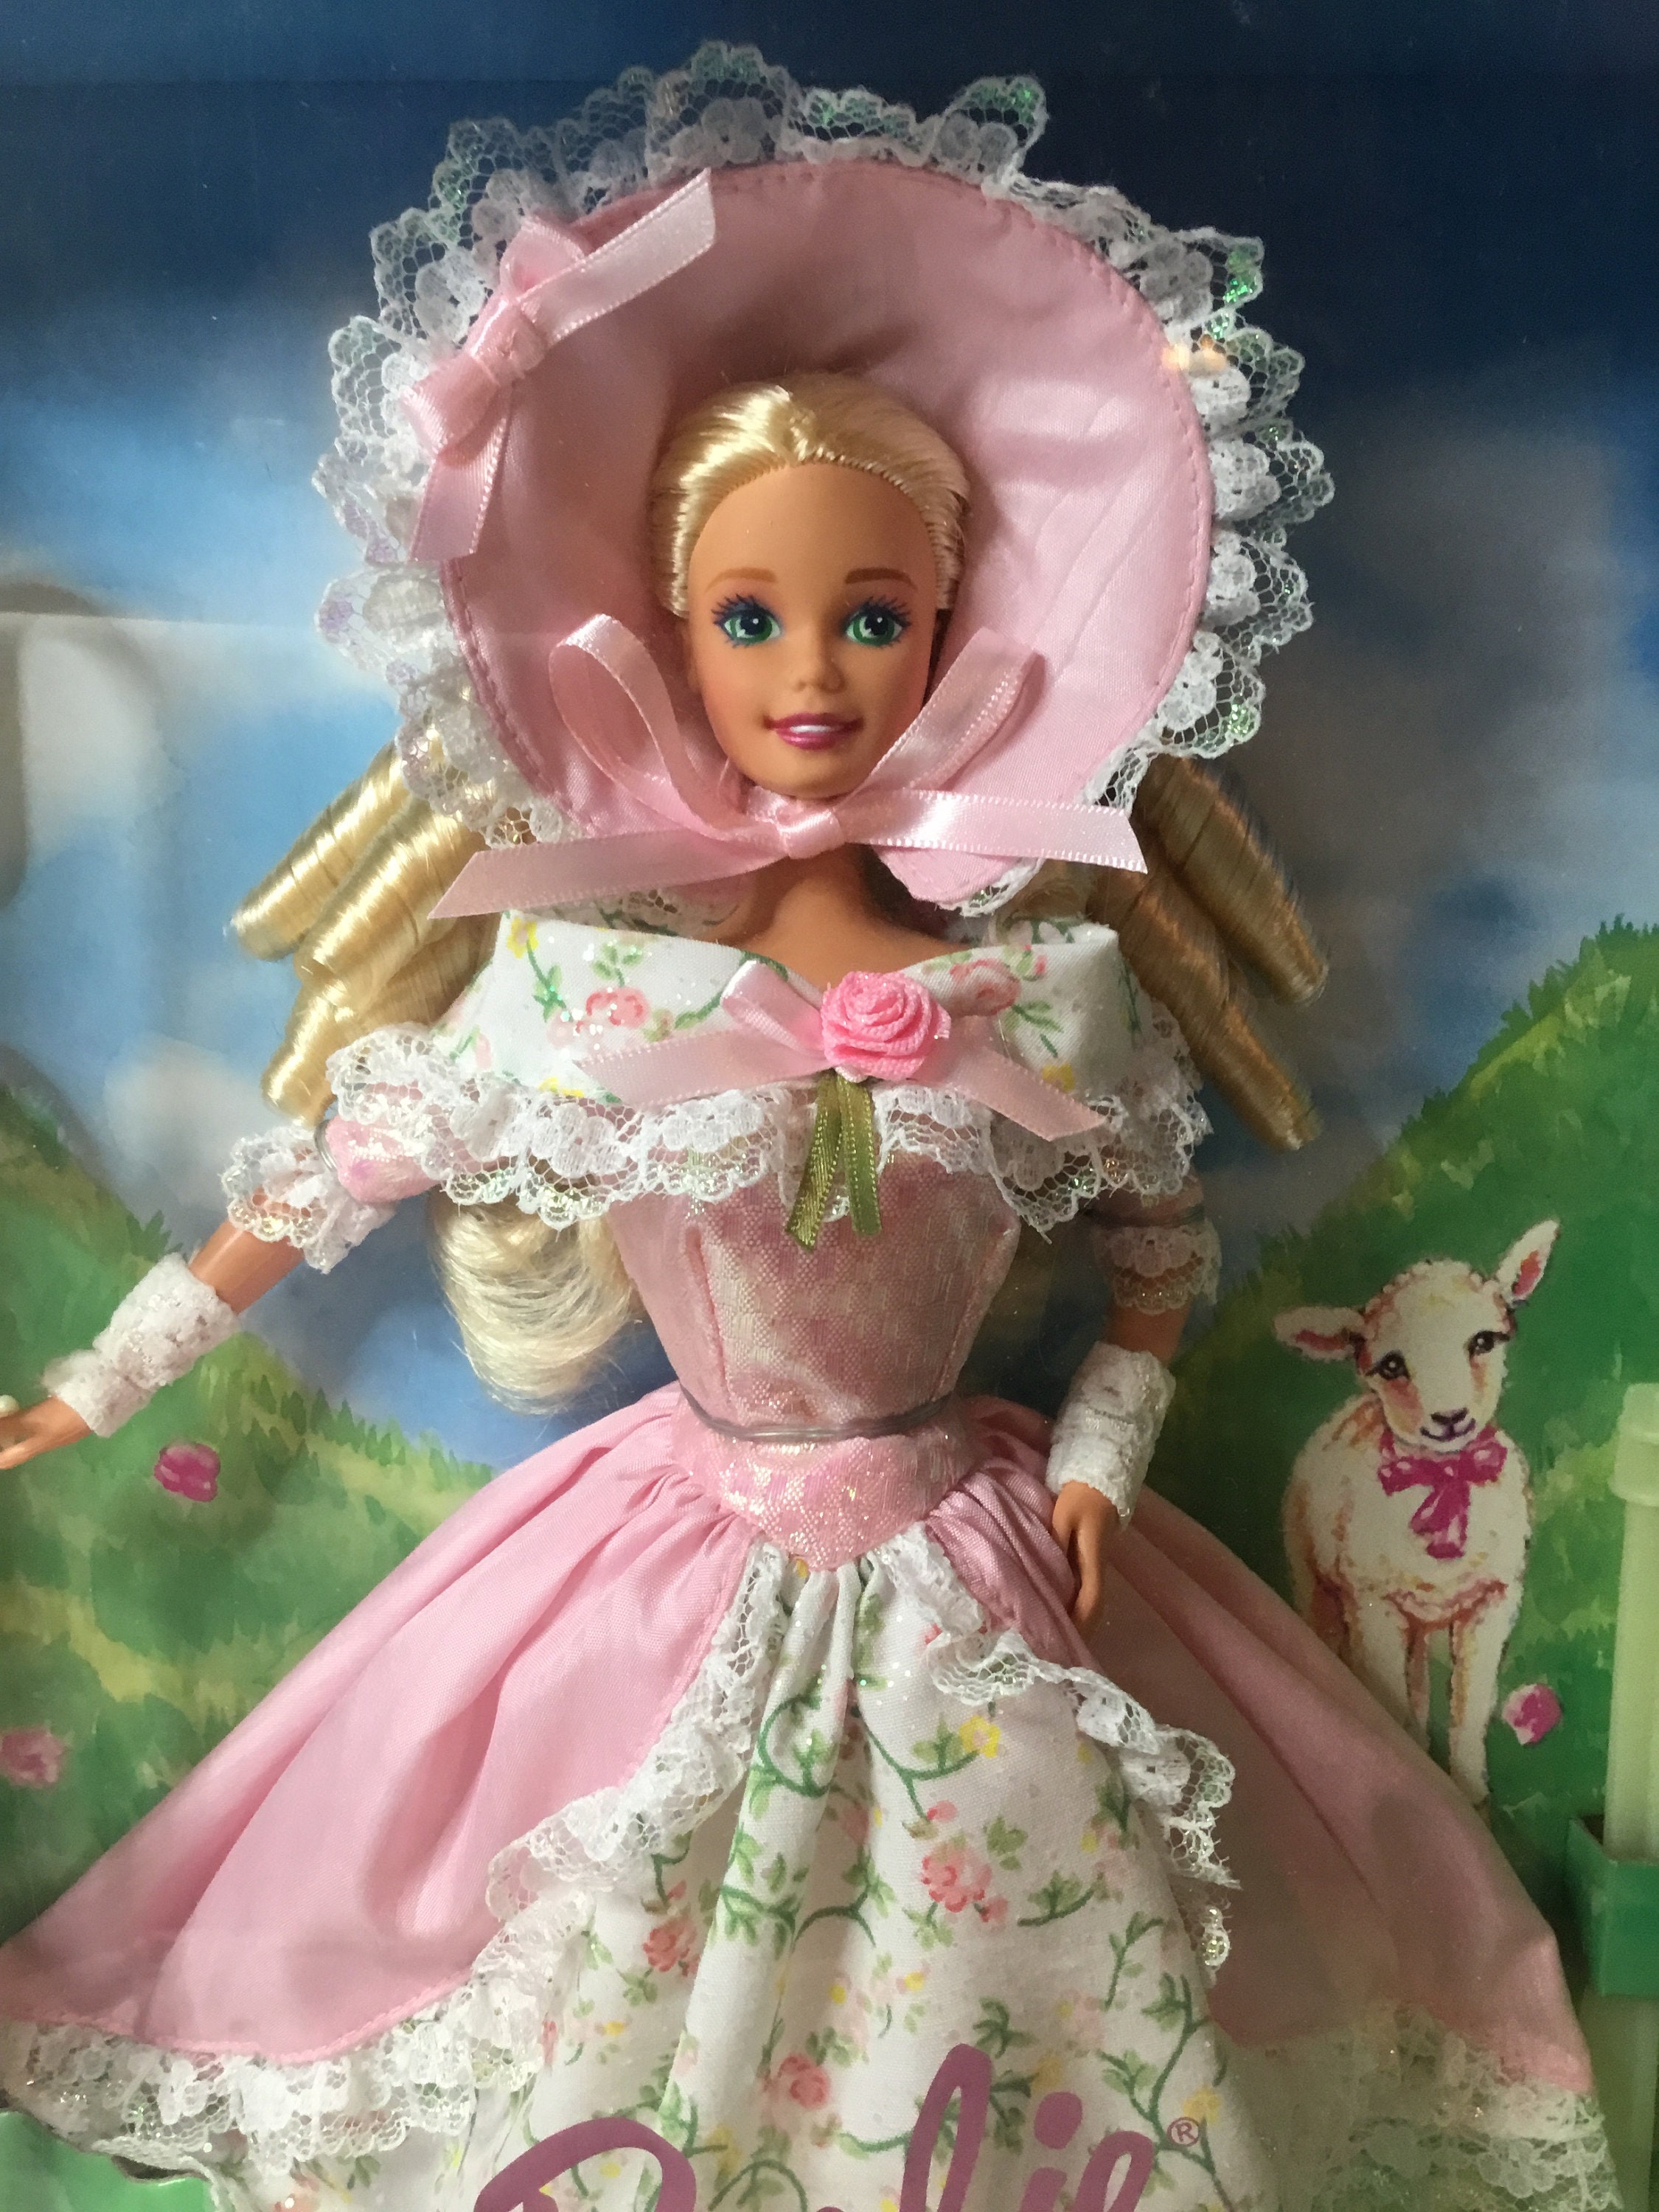 Barbie as Little Bo Peep Who Lost Her Sheep - Etsy